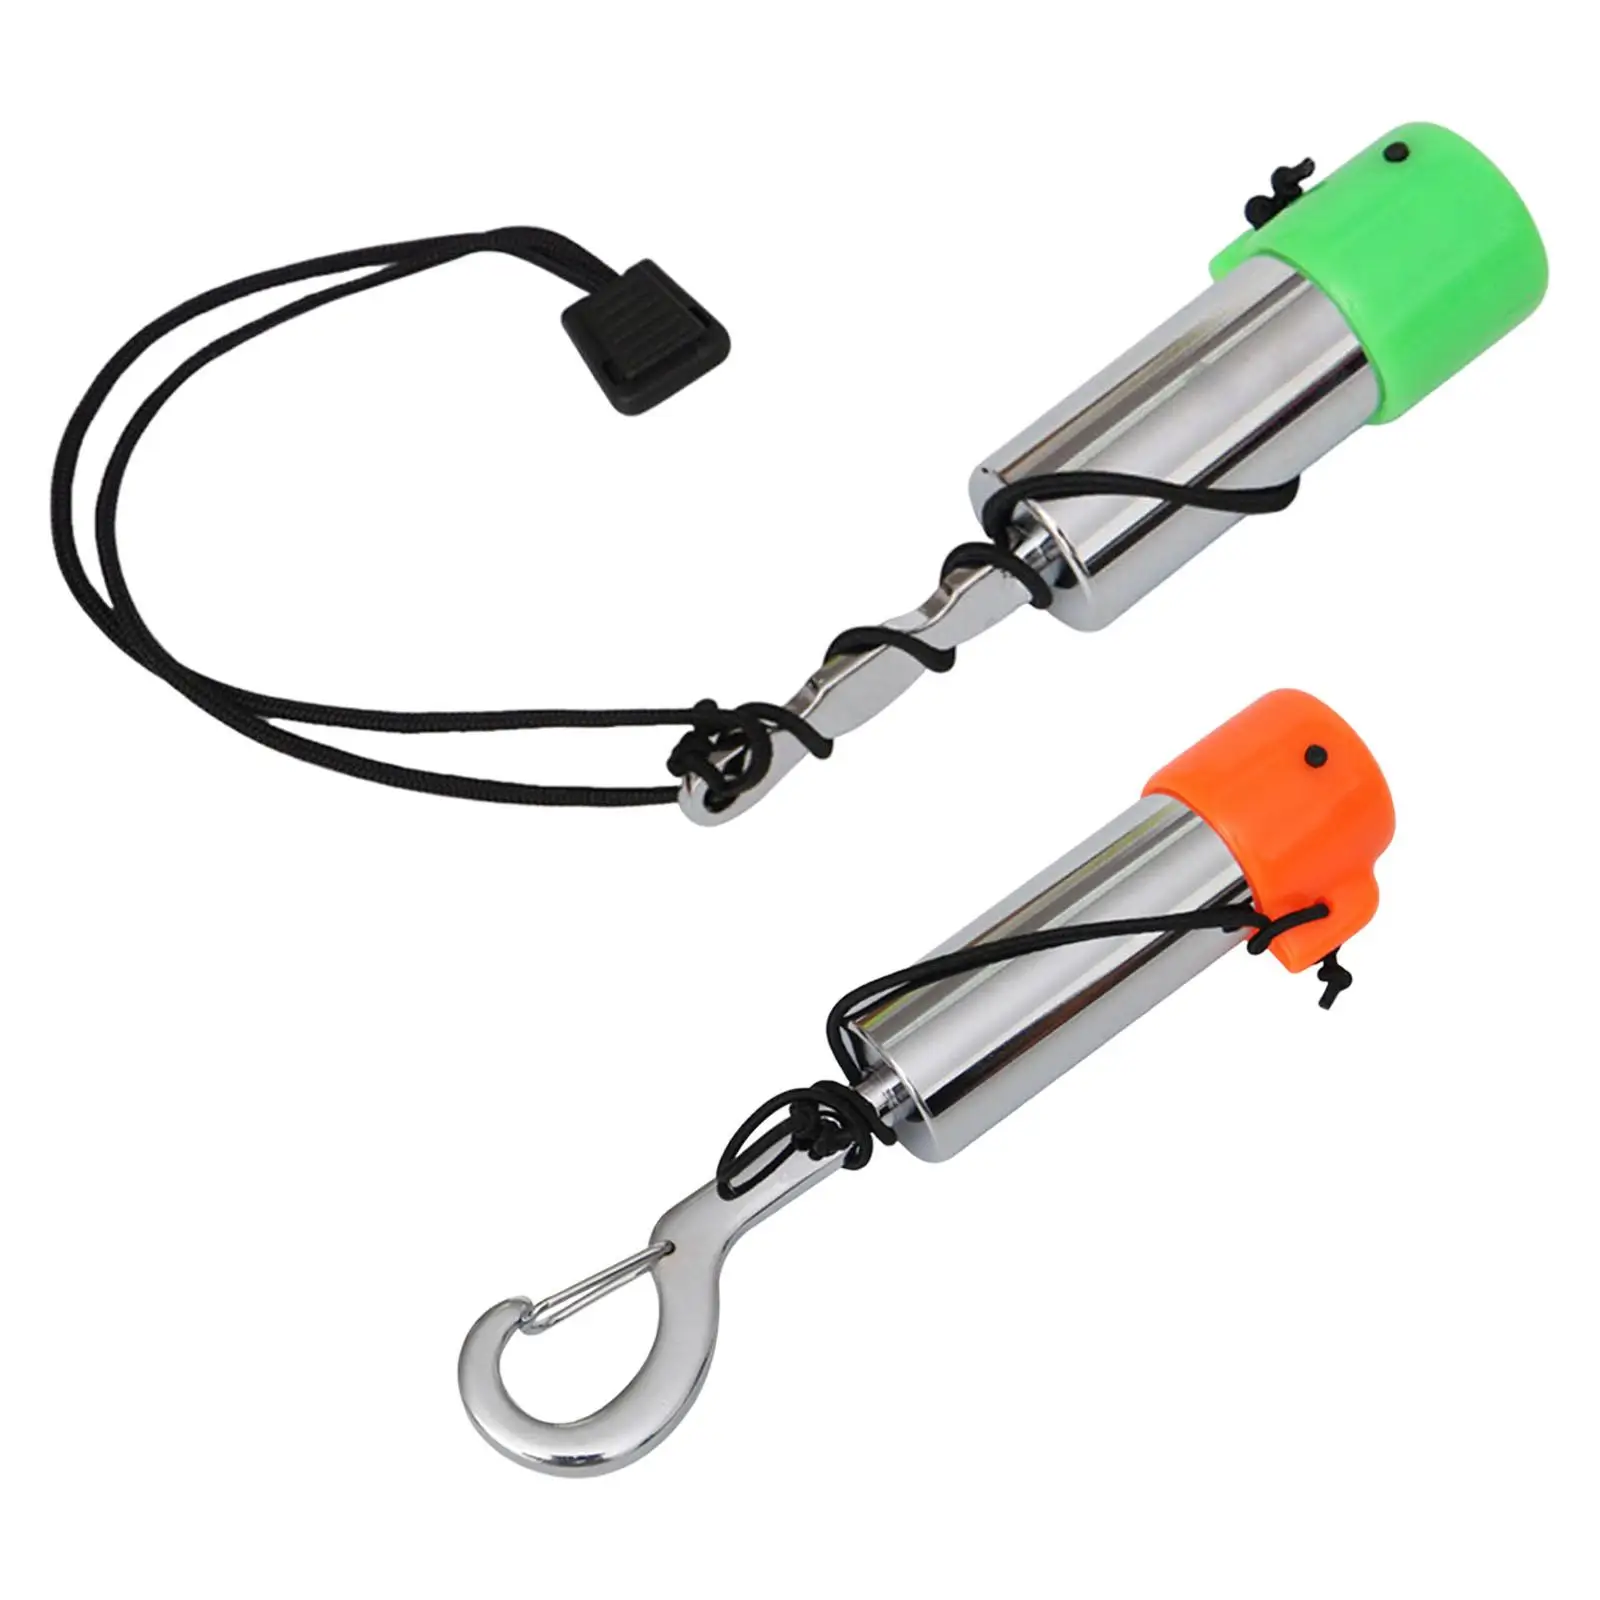 Scuba Rattle Stick Silver with Clip Underwater Shaker Underwater Diving Tool Stainless Loudest Portable Scuba Diving Fittings